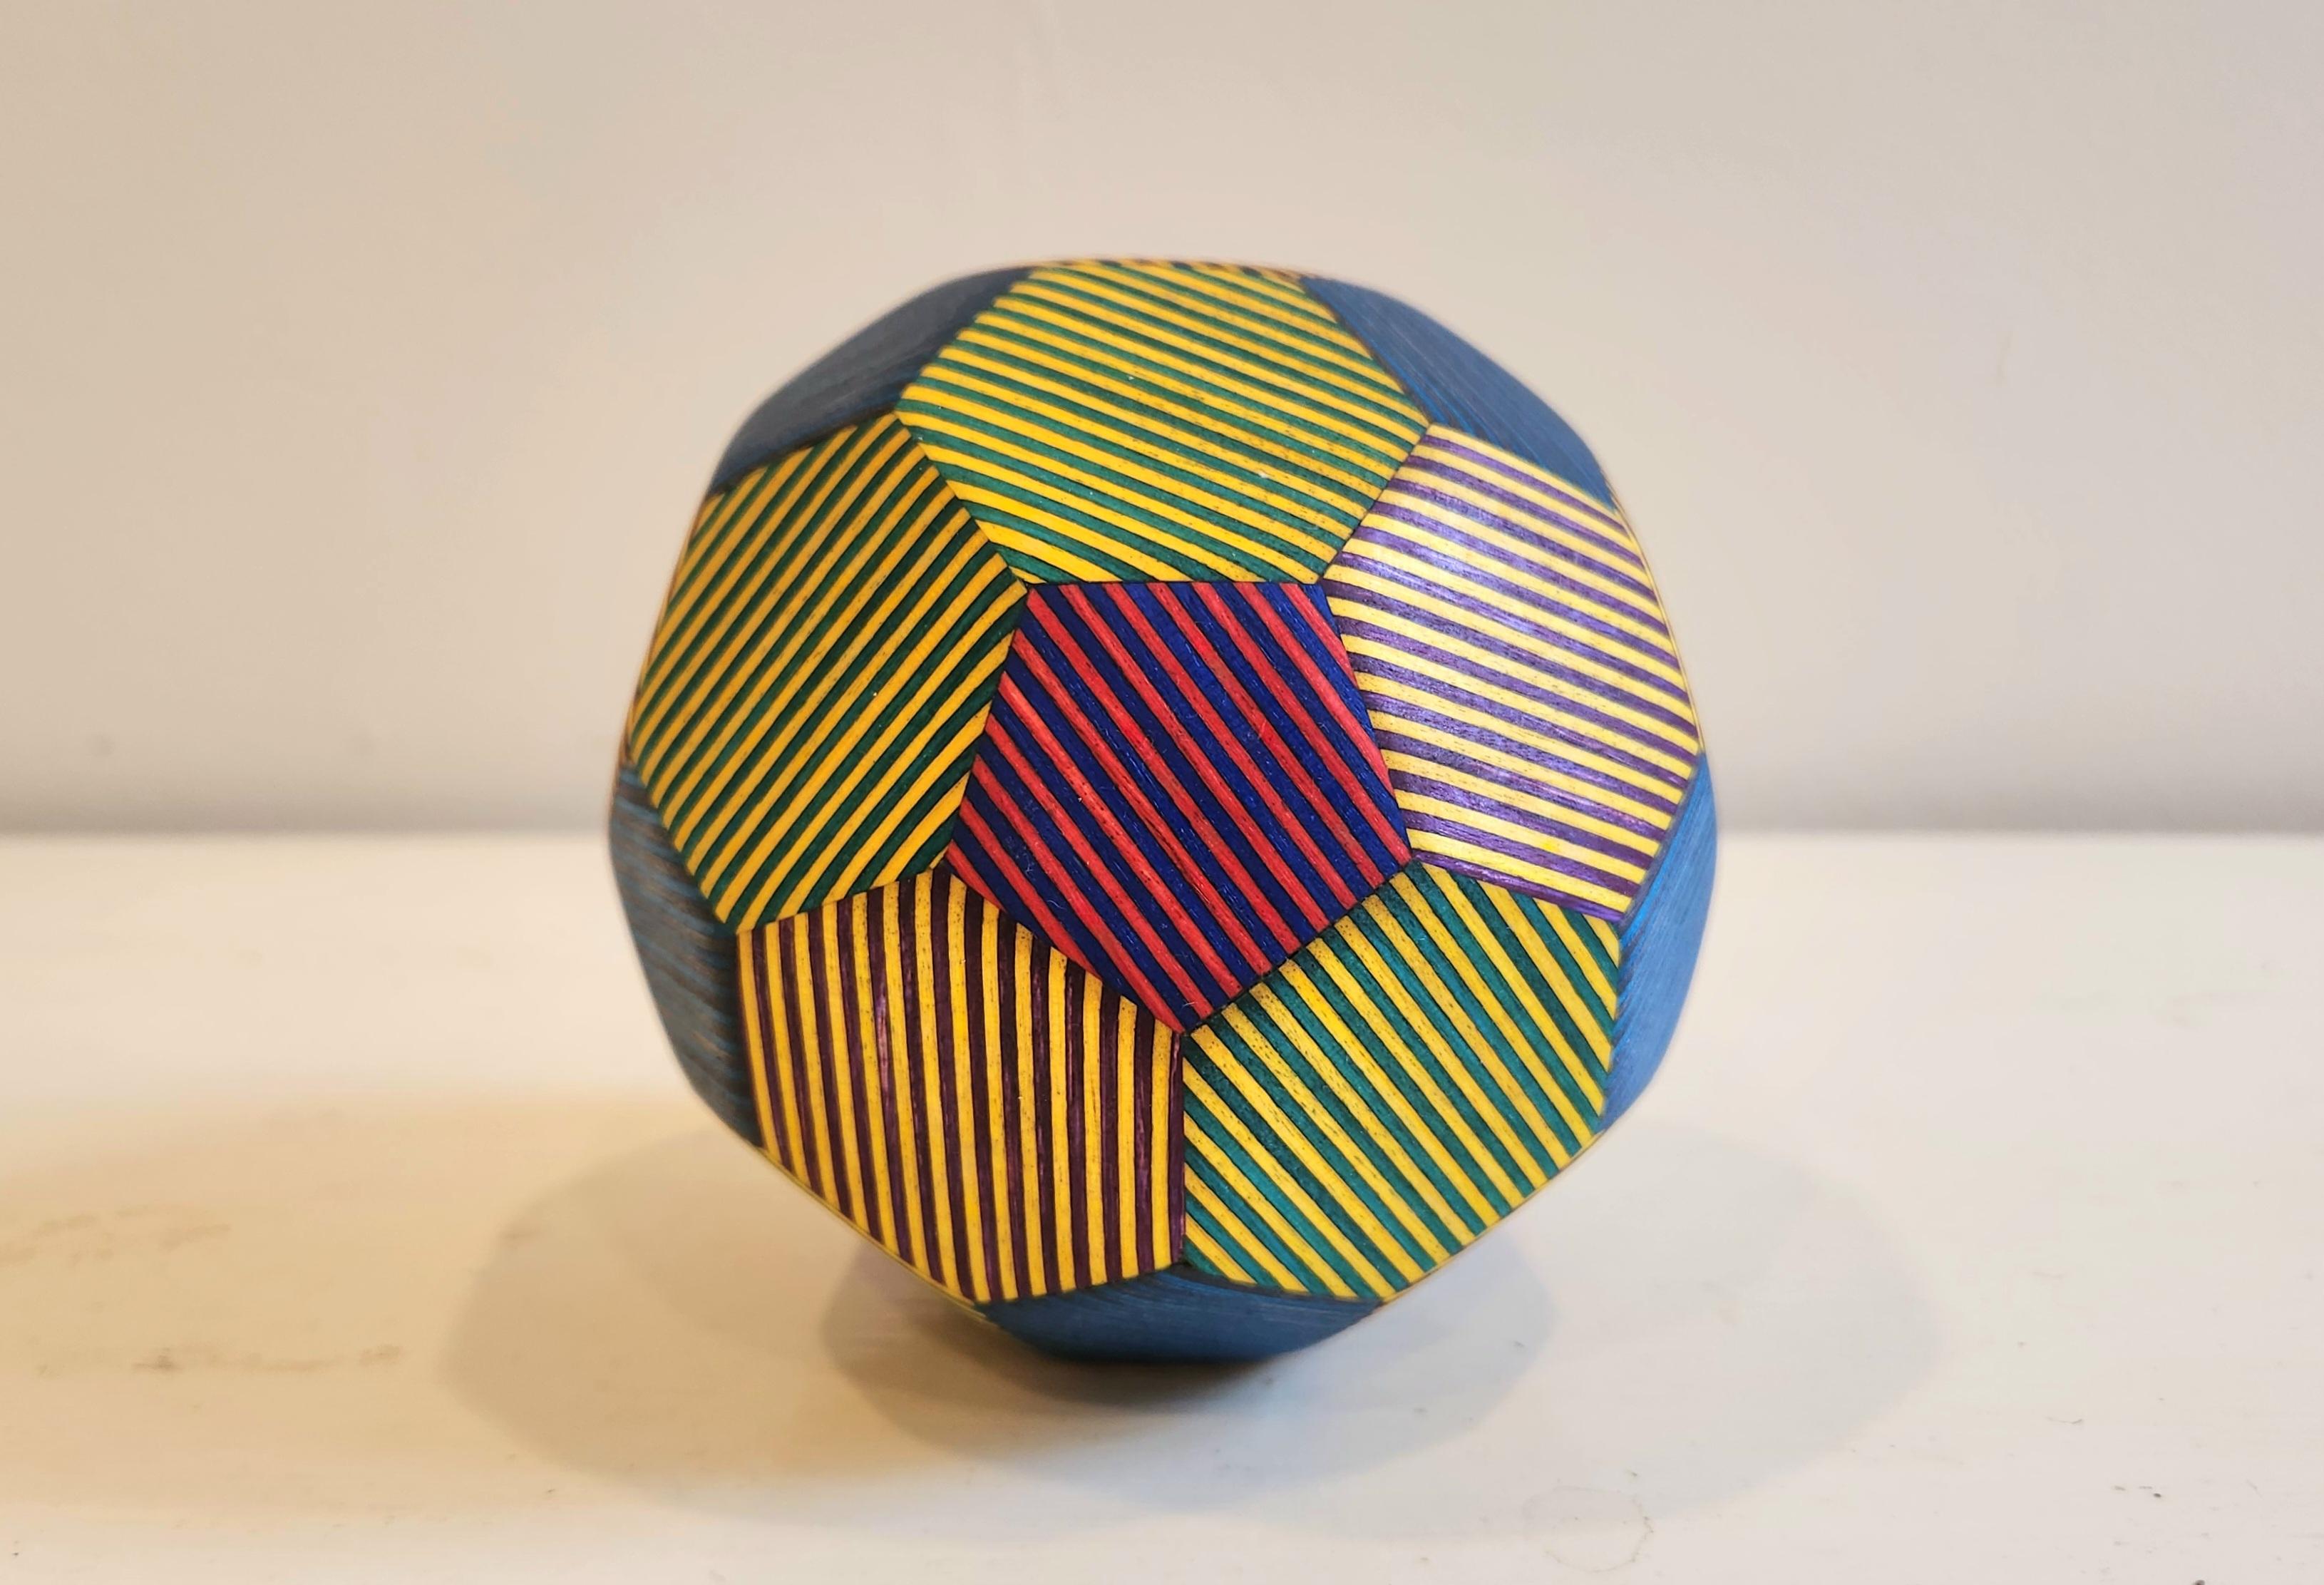 Sculpted Orb -- Truncated Icosahedron